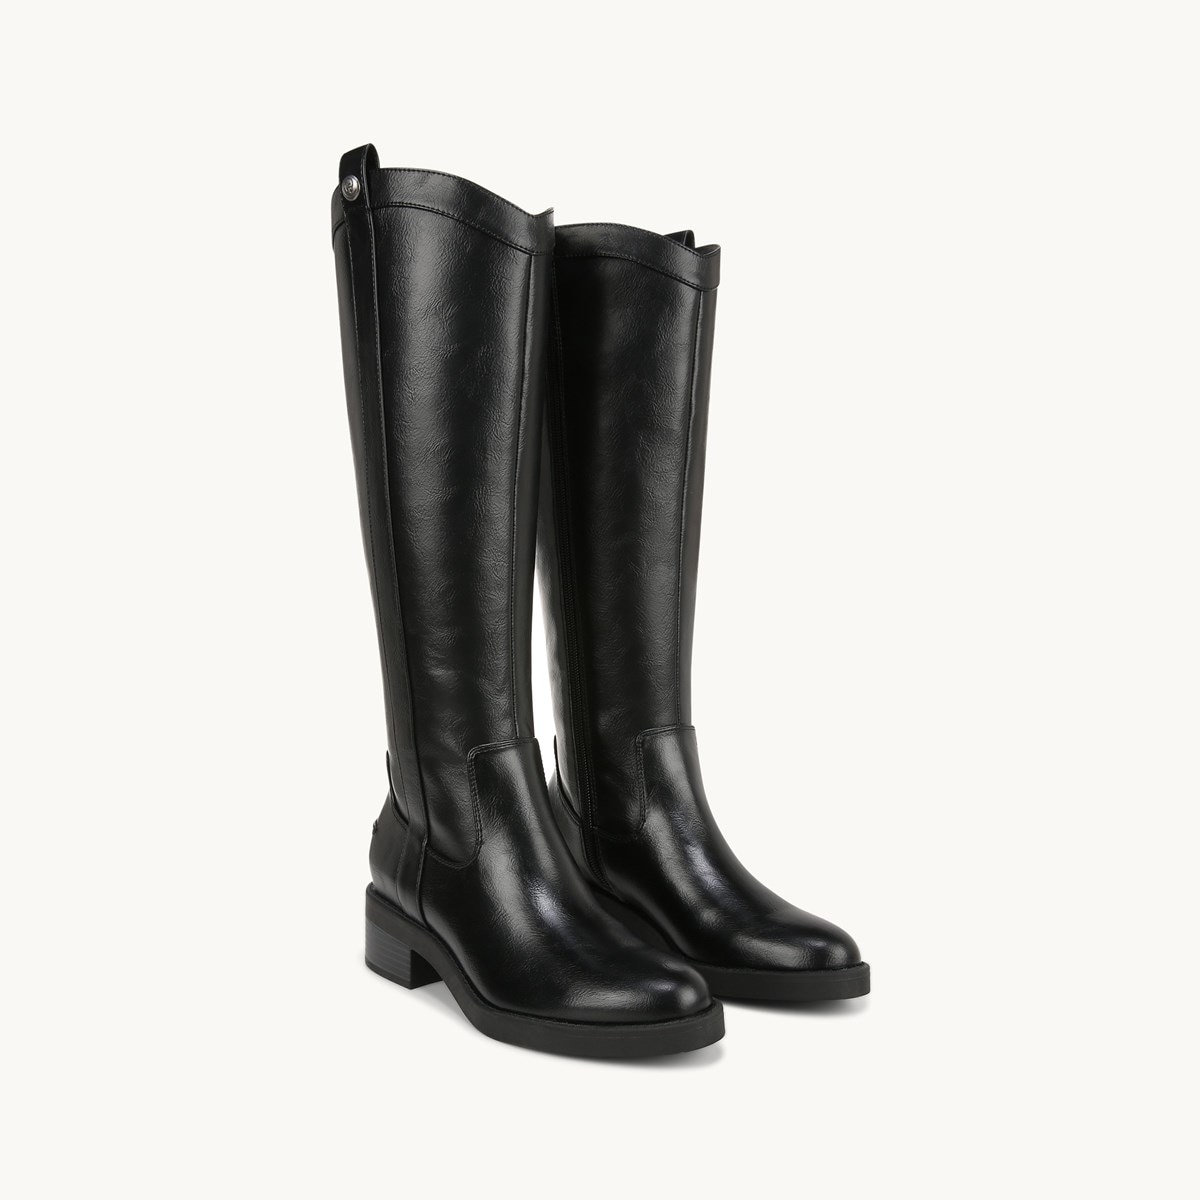 fetch Heavy truck in front of LifeStride Bridget Wide Calf Knee High Boot | Womens Boots